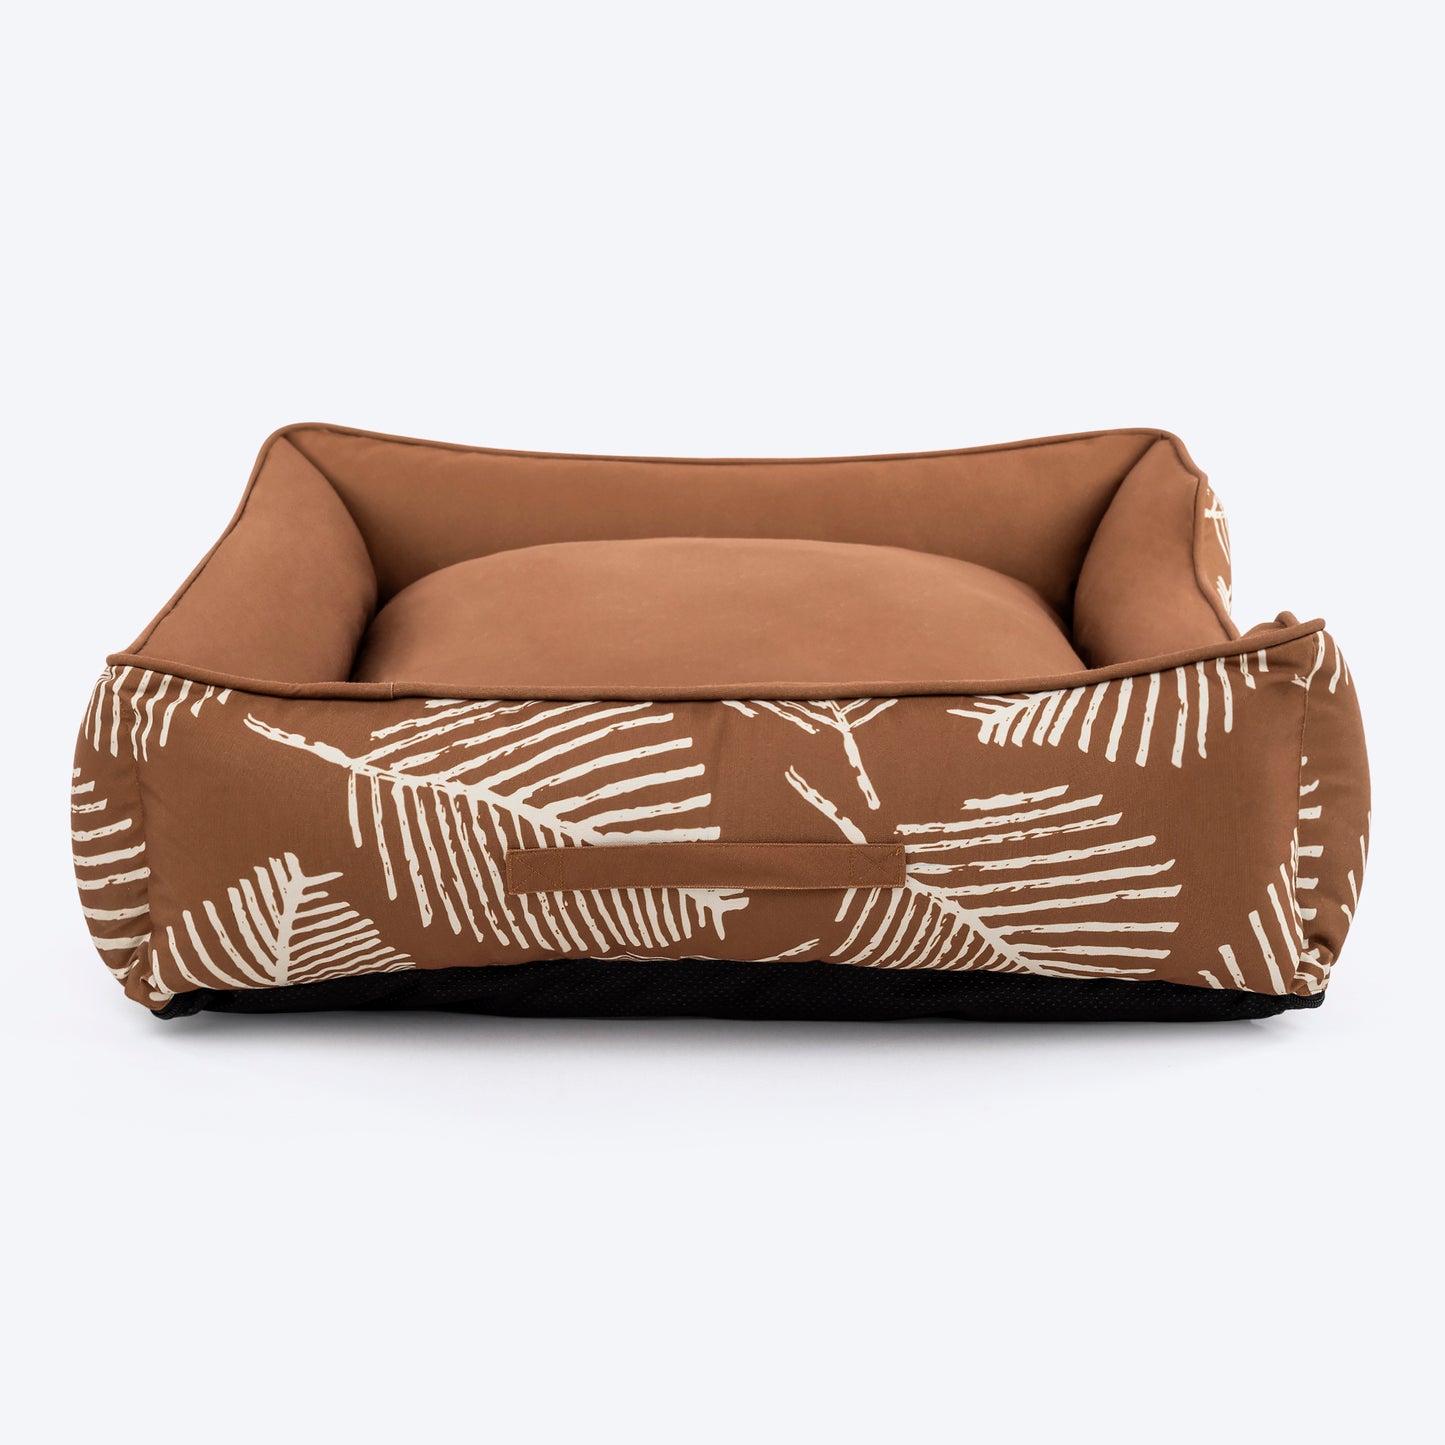 HUFT Tropical Palm Paradise Lounger Dog Bed - Brown -06